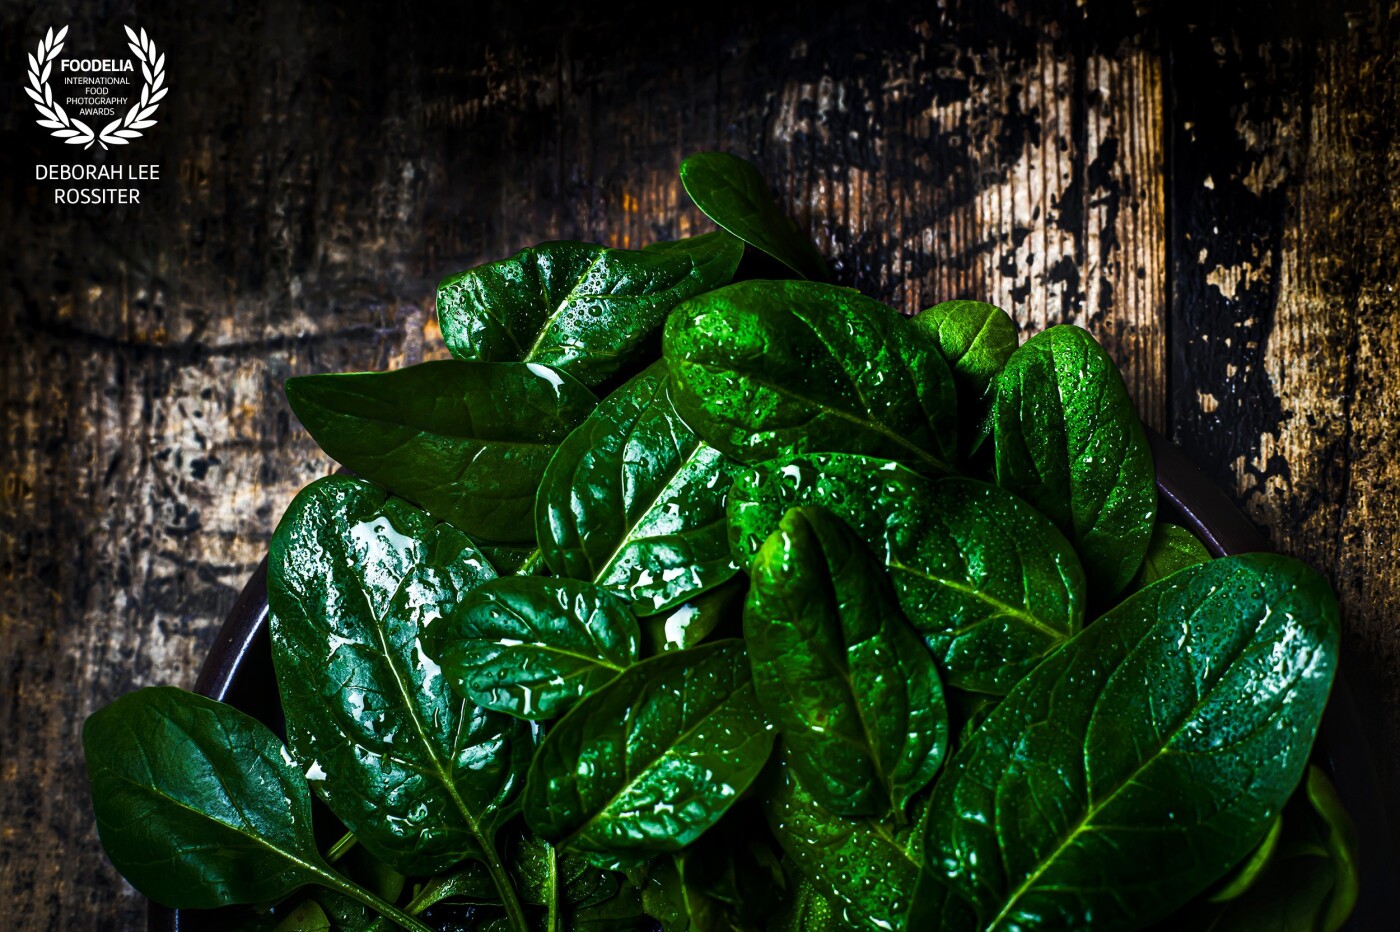 Last of the organic  spinach picked fresh from the garden washed and ready to lightly steam as part of my plant-based diet <br />
Nikon D850